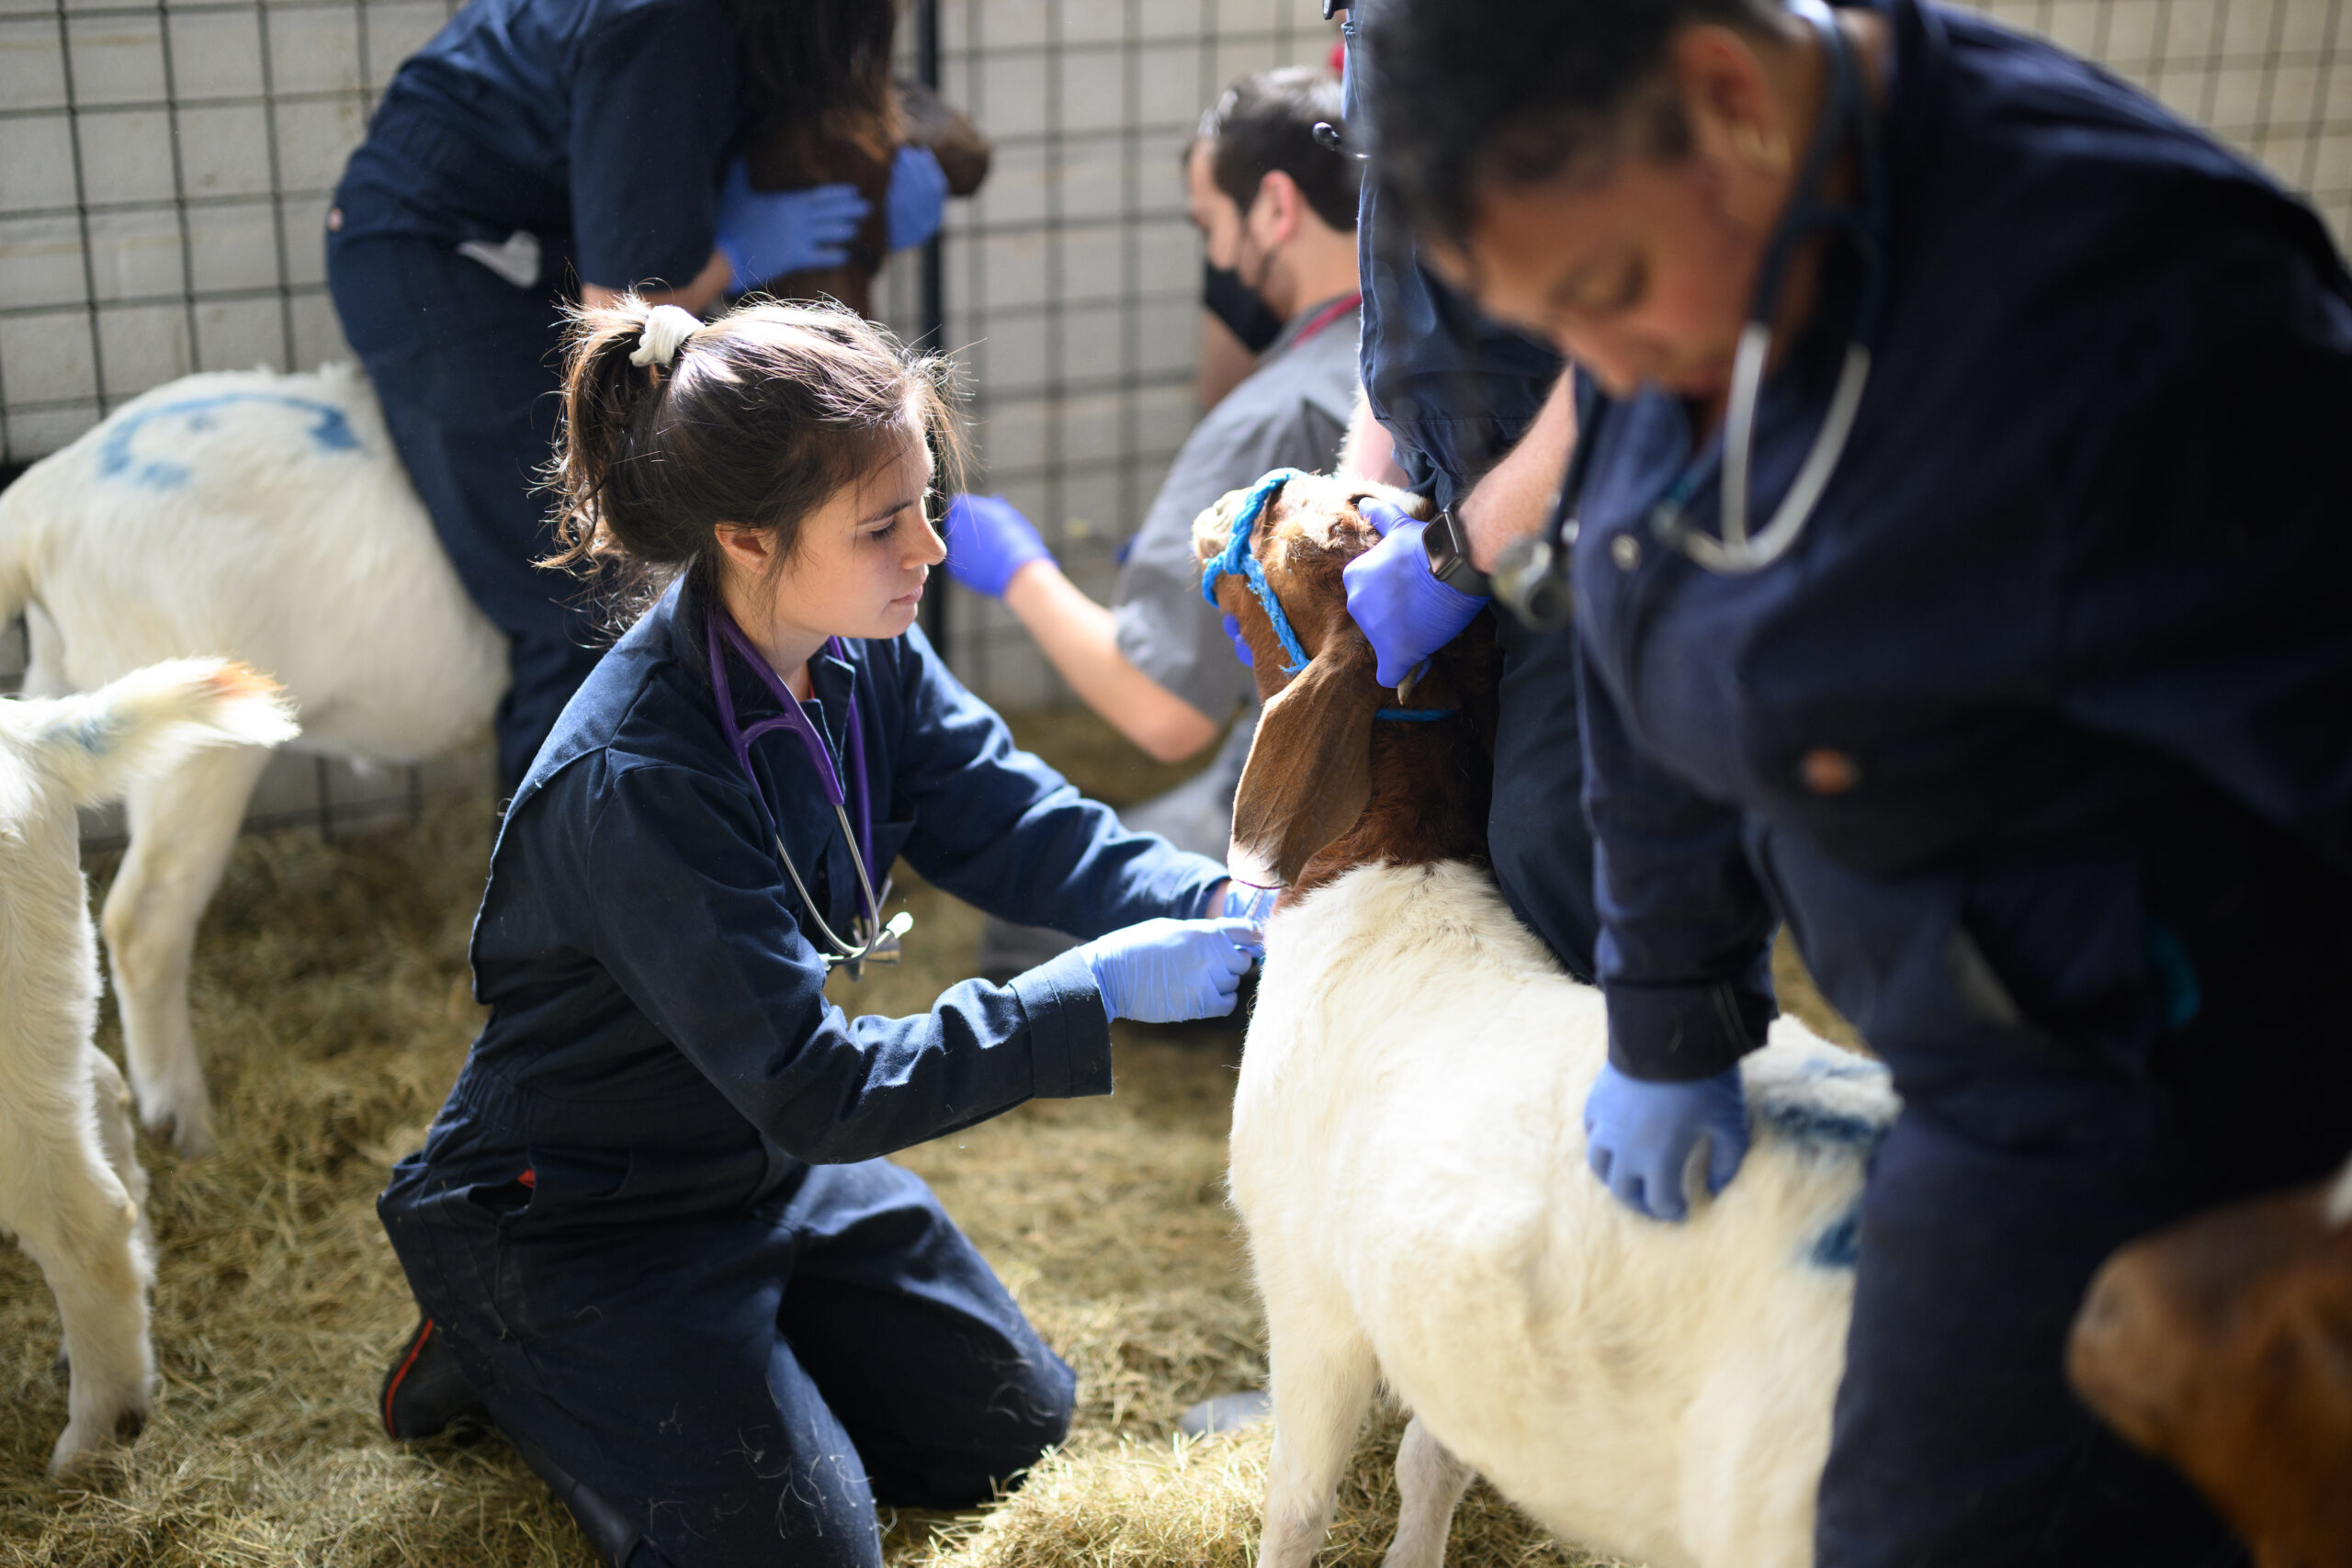 Students examine goats at the Teaching Animal Unit.